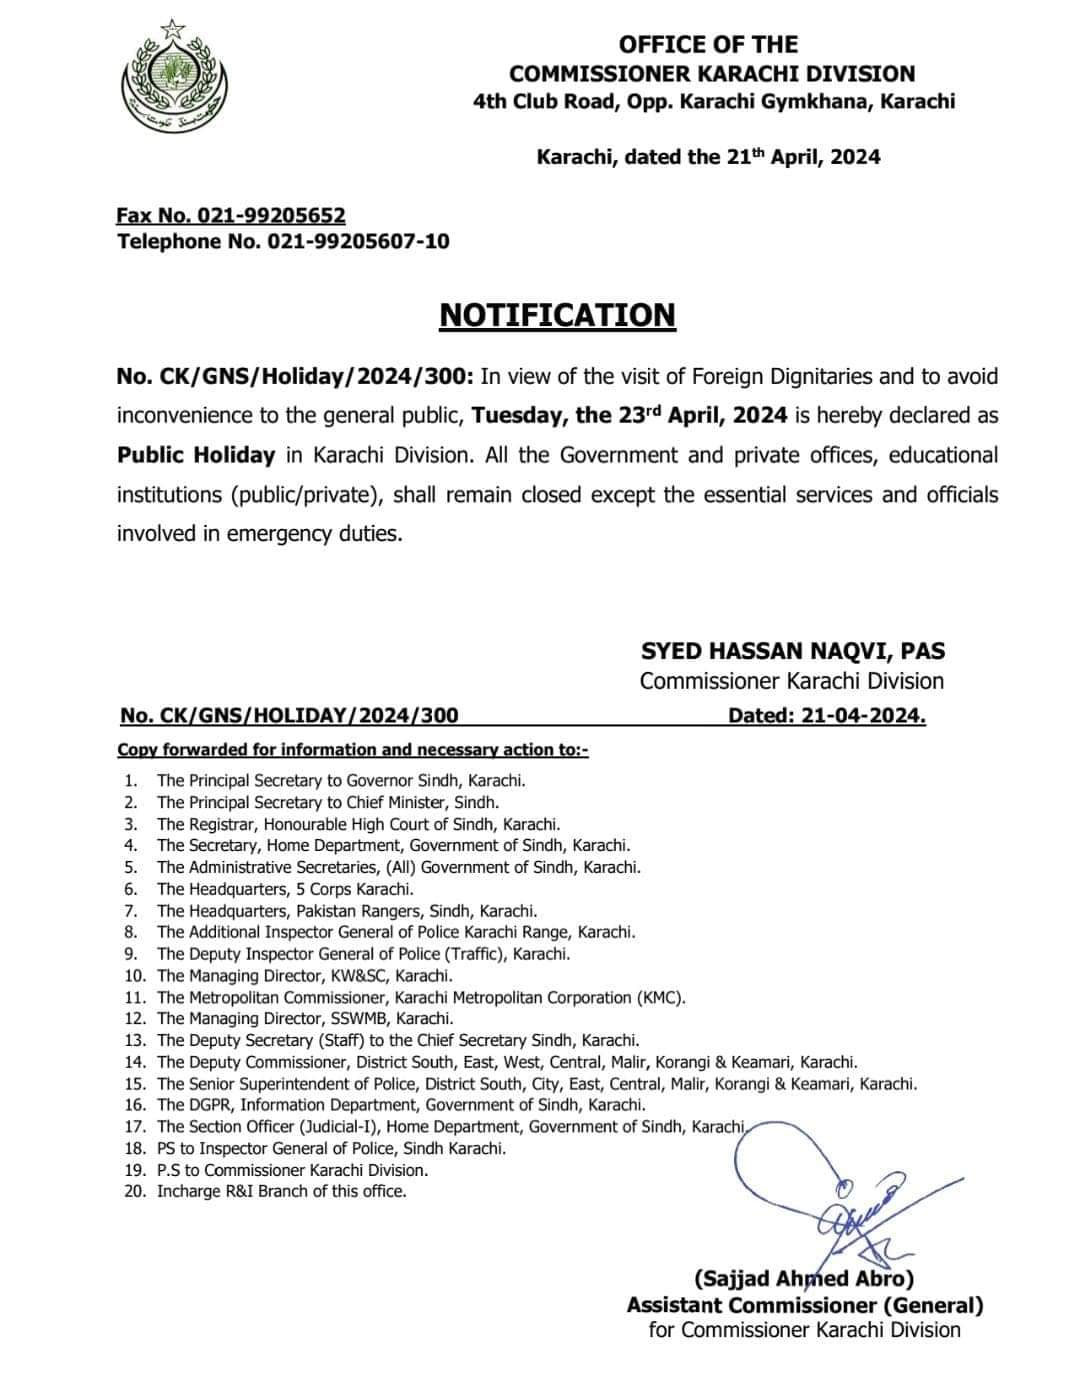 Public holiday announced in Karachi on April 23